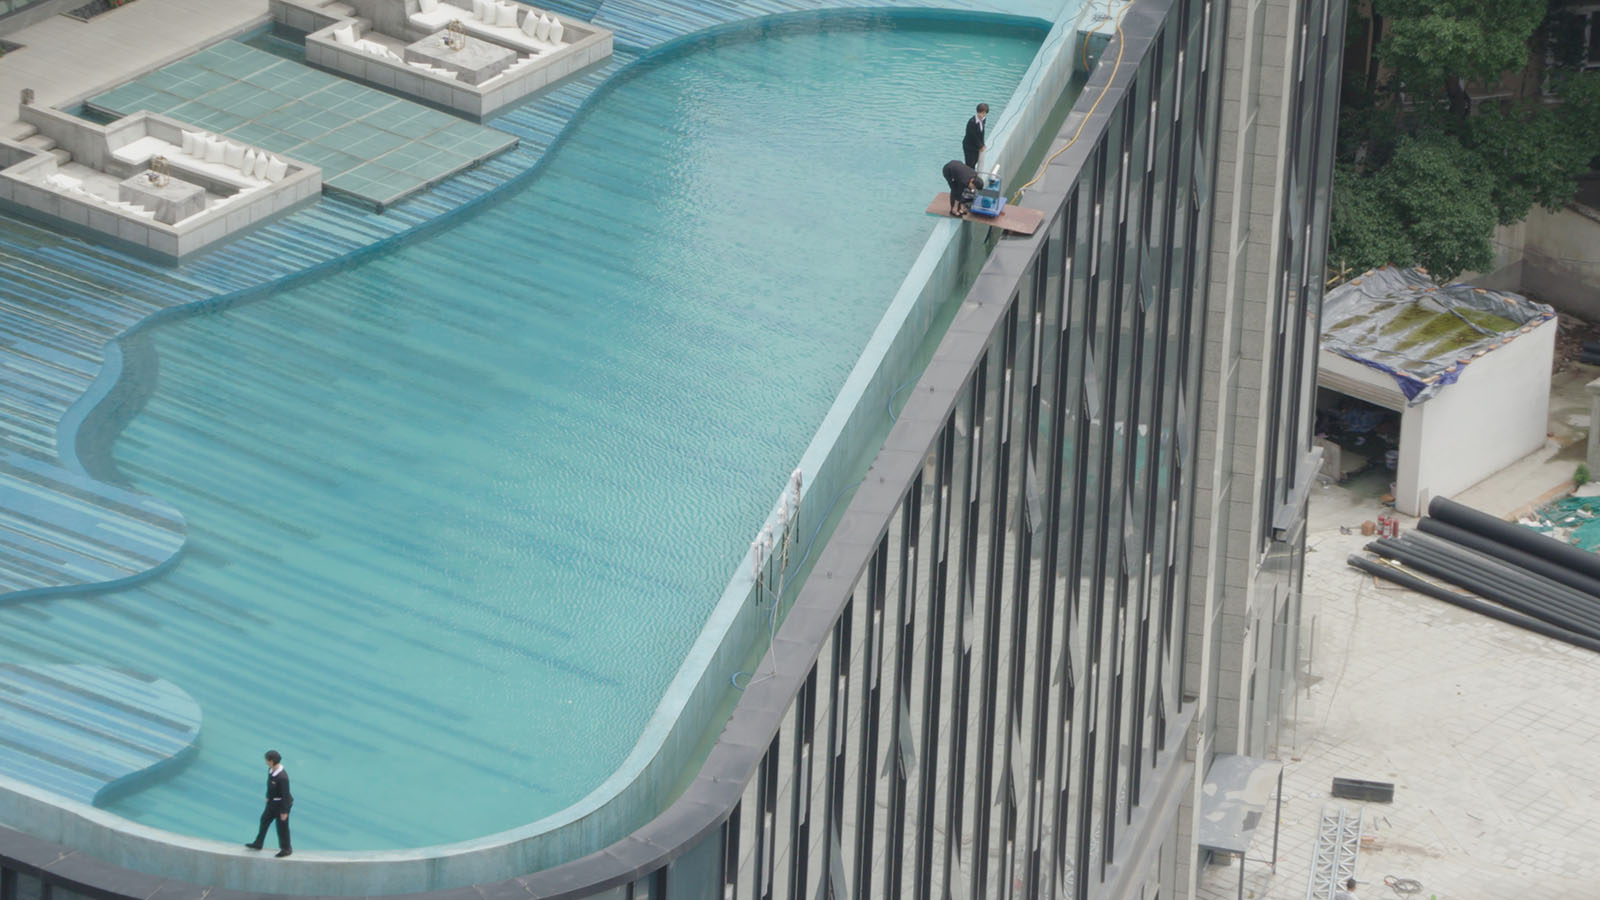 Staff working on a rooftop pool in Chengdu, China. Image © MTV Documentary Films